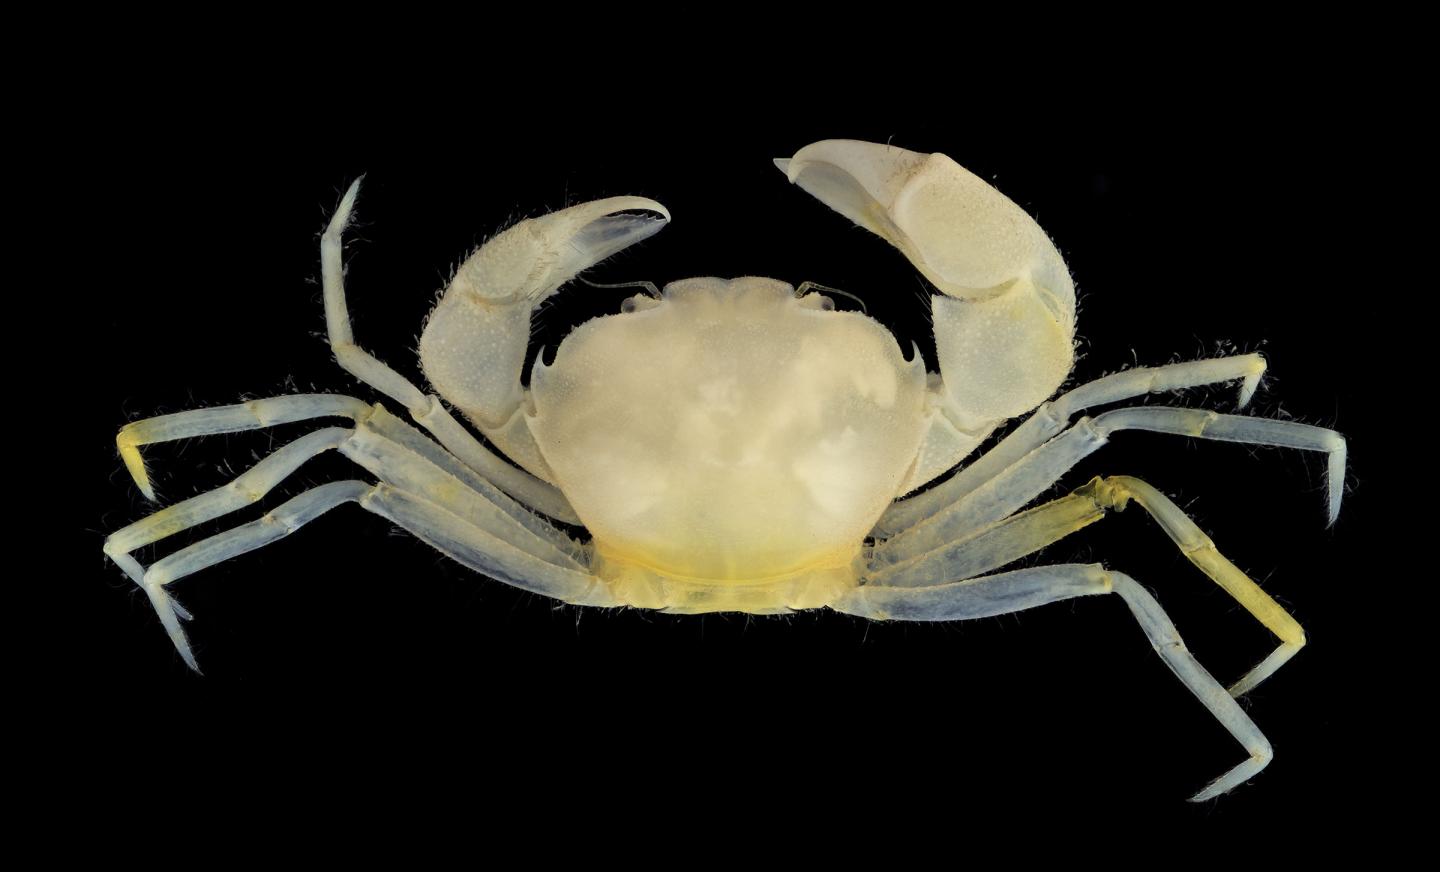 The Newly Discovered Crab Species and Genus <i>Harryplax severus</i>